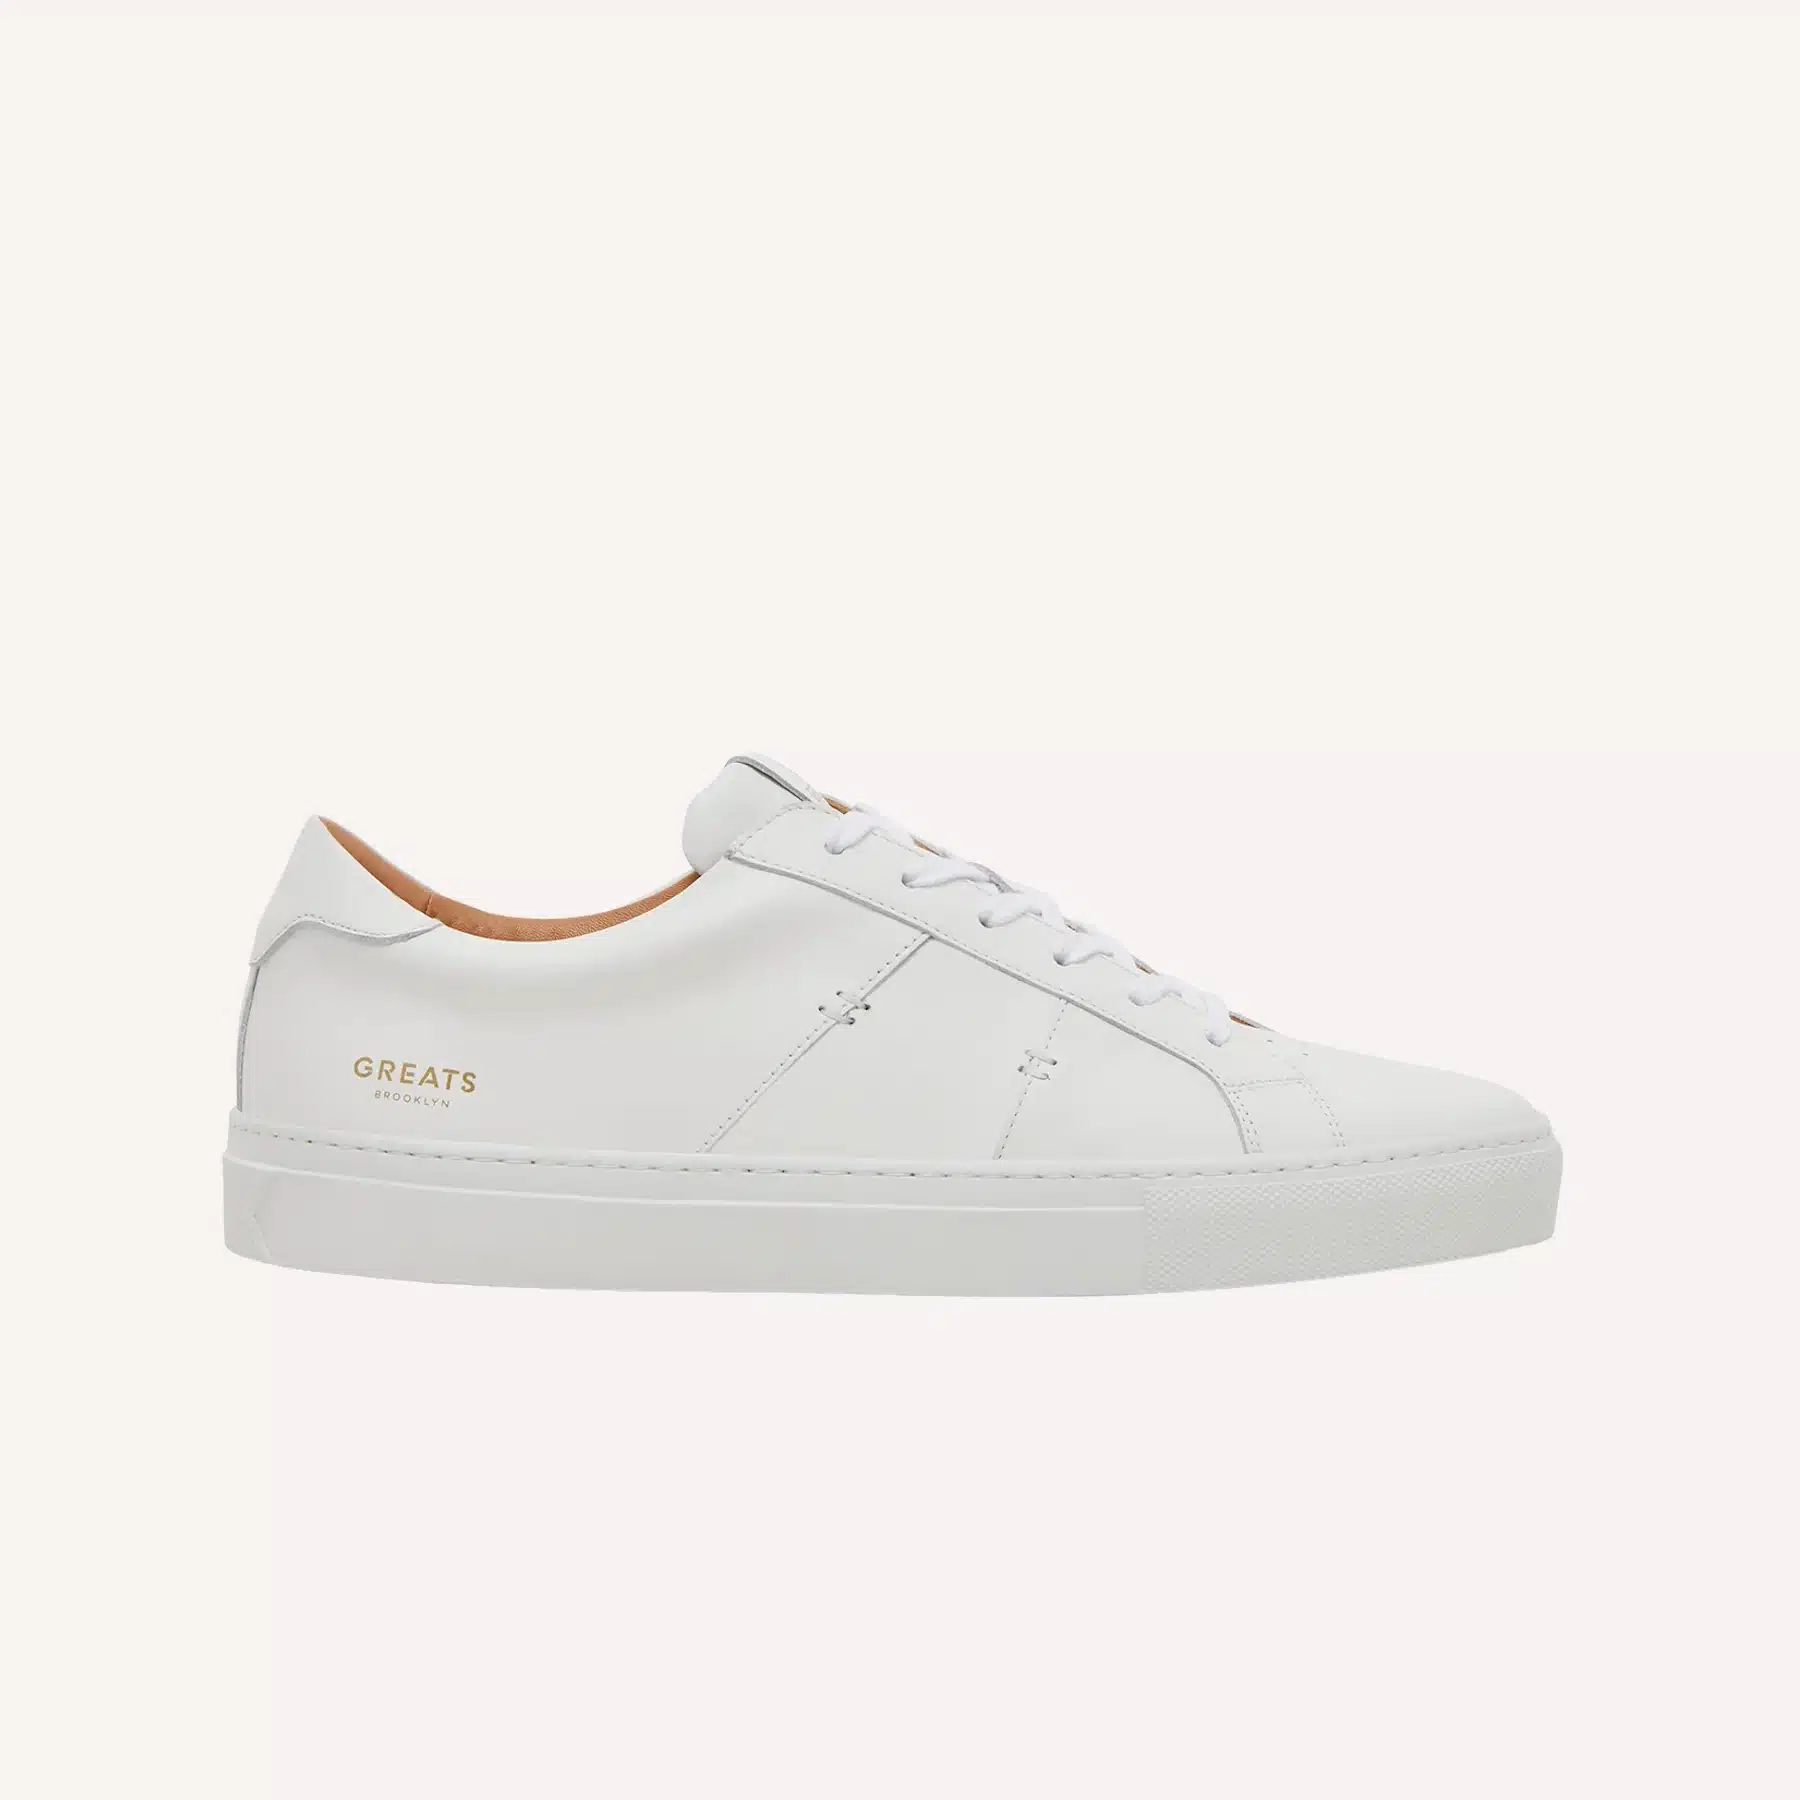 Greats Royale Blanco 2.0 white sneakers.